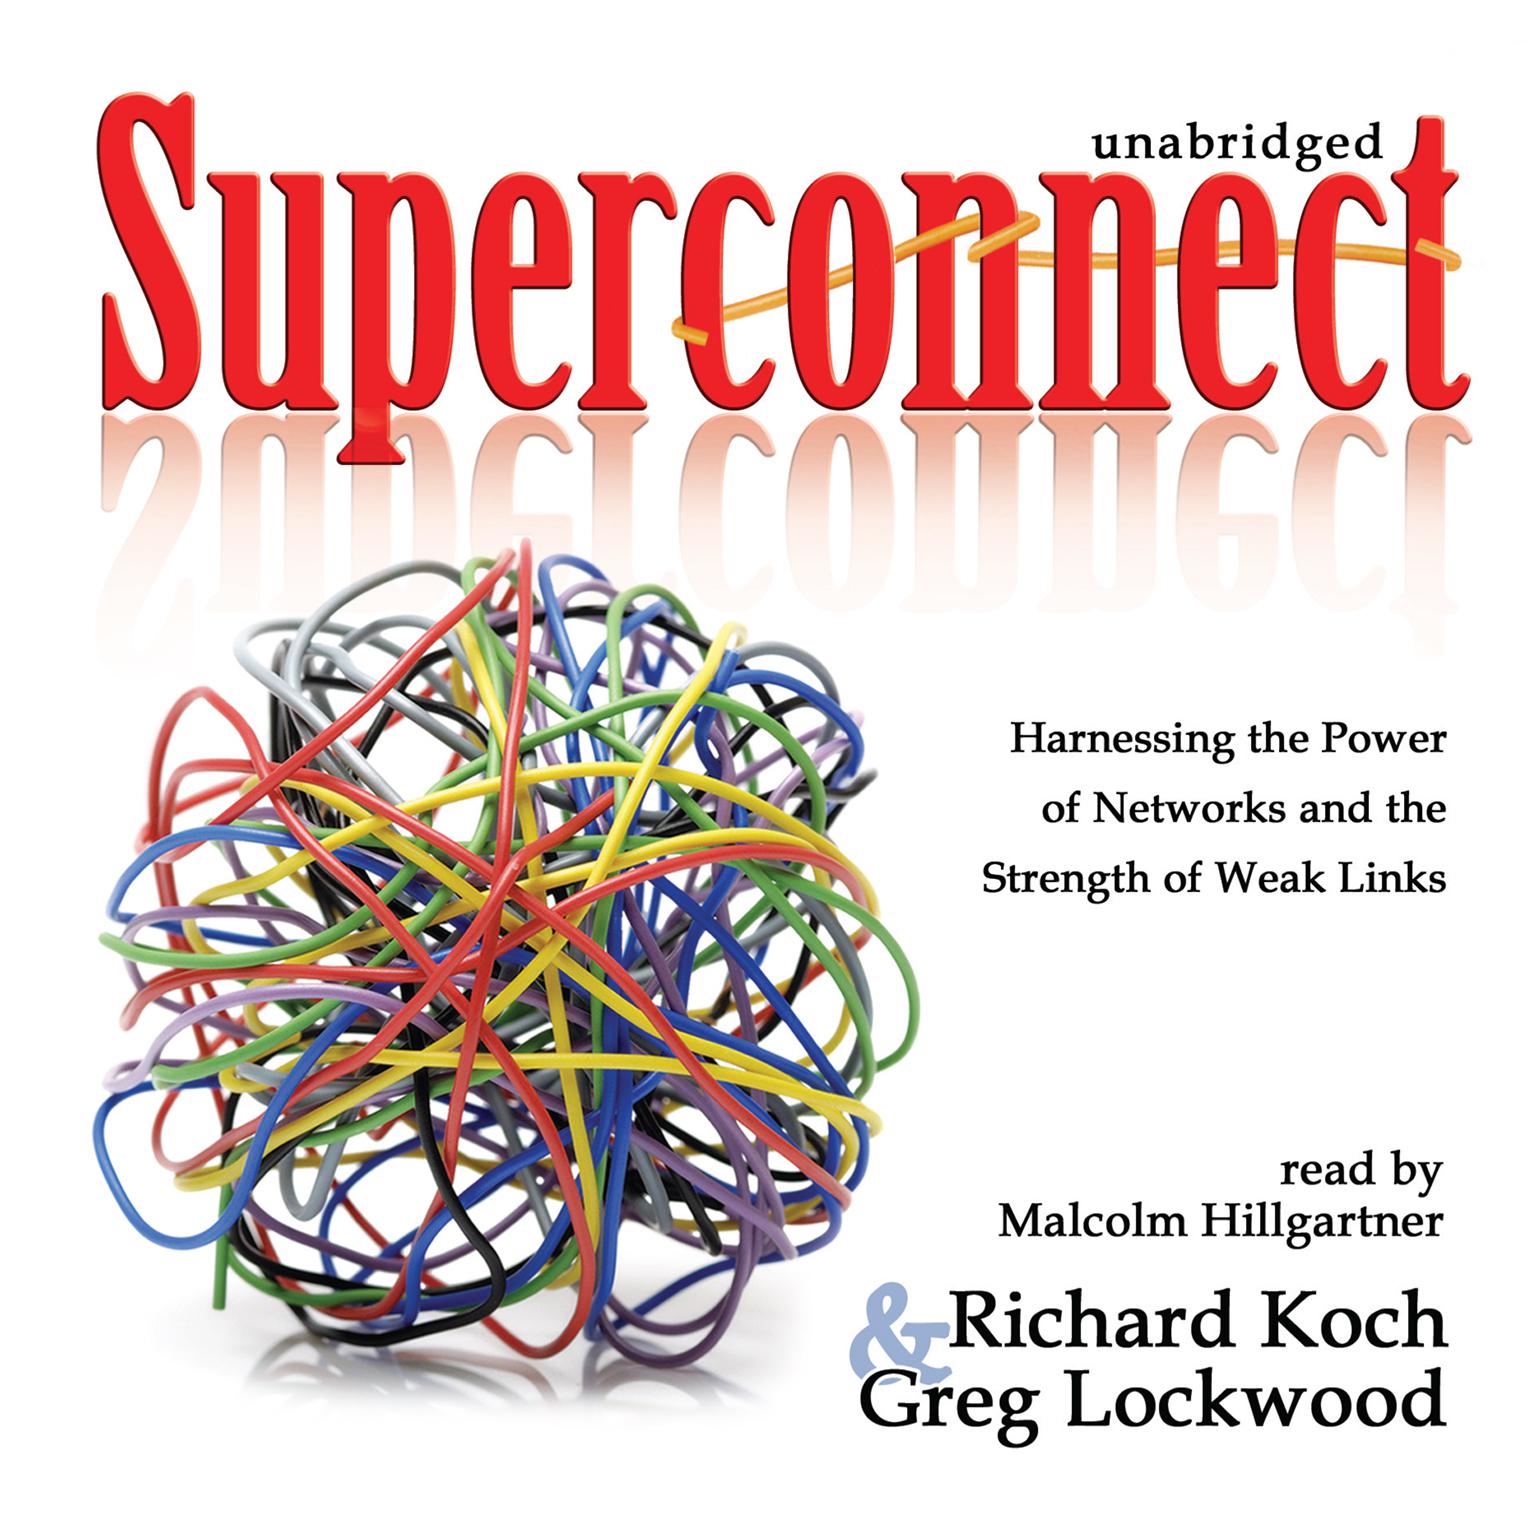 Superconnect: Harnessing the Power of Networks and the Strength of Weak Links Audiobook, by Richard Koch